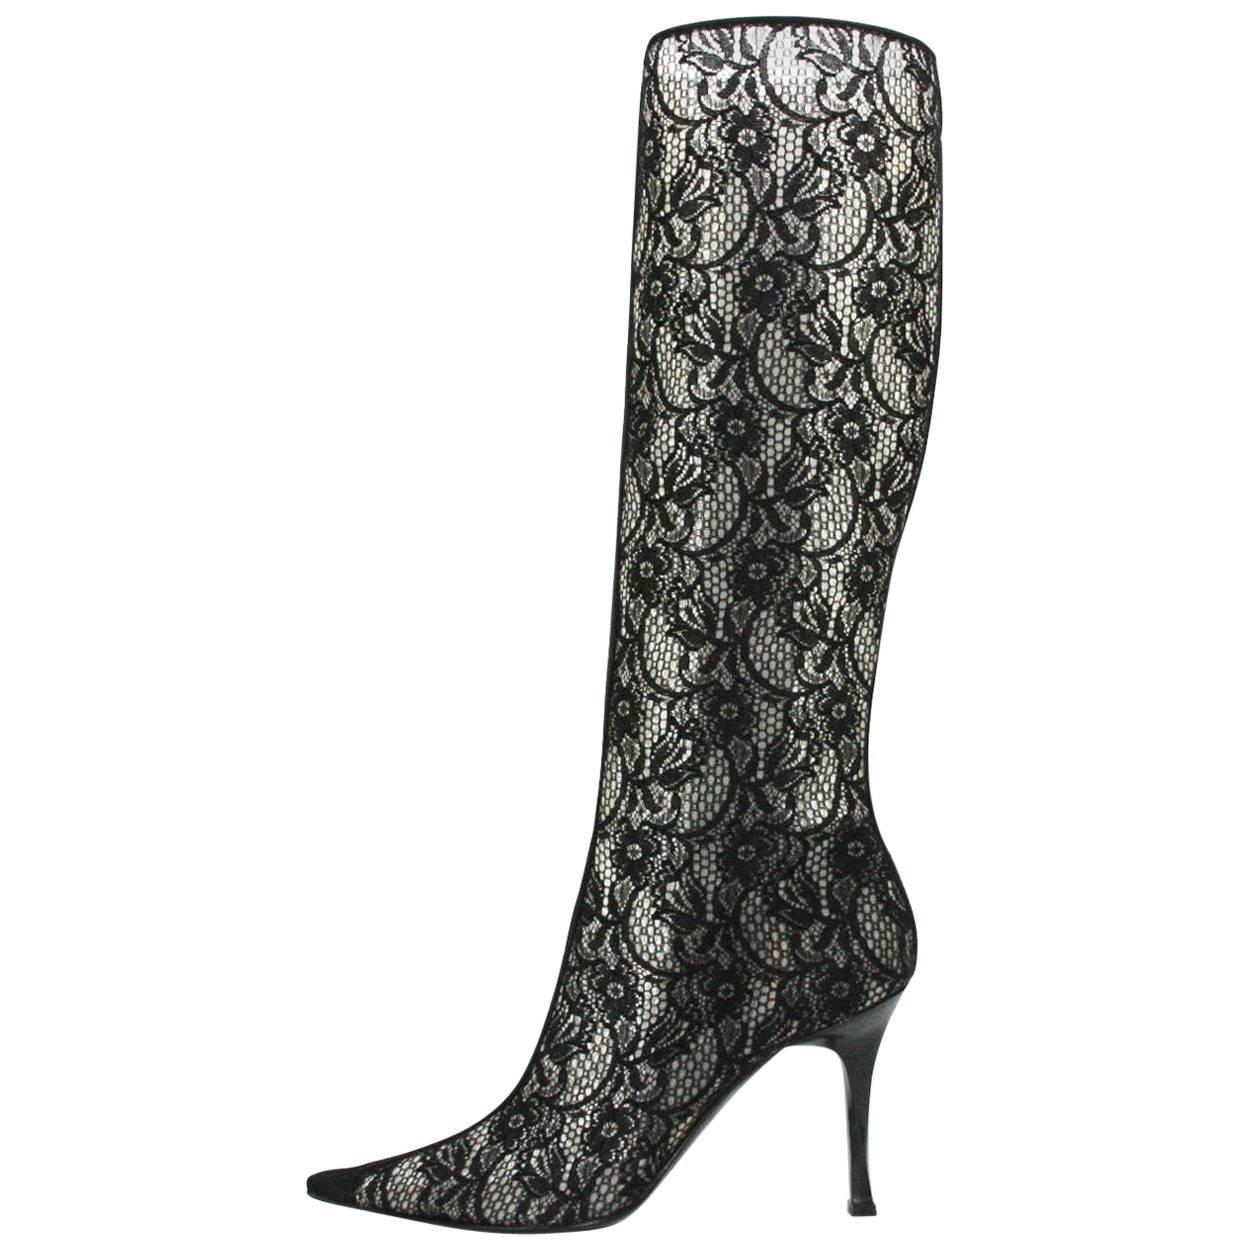 New CASADEI Lace Black Twisted Heel Boots size 9